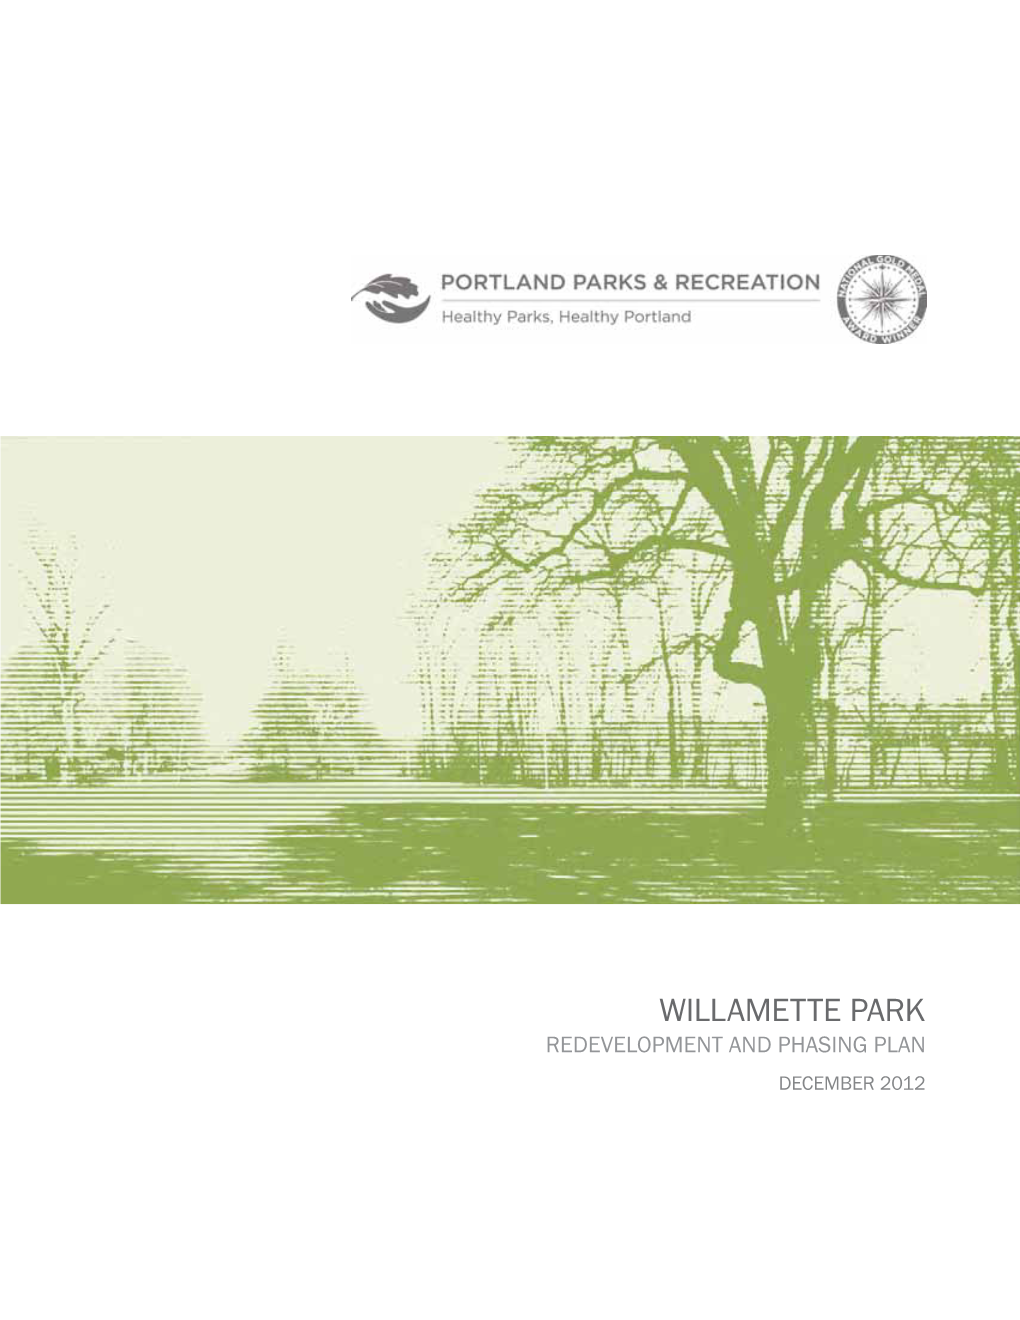 WILLAMETTE PARK REDEVELOPMENT and PHASING PLAN DECEMBER 2012 Acknowledgments